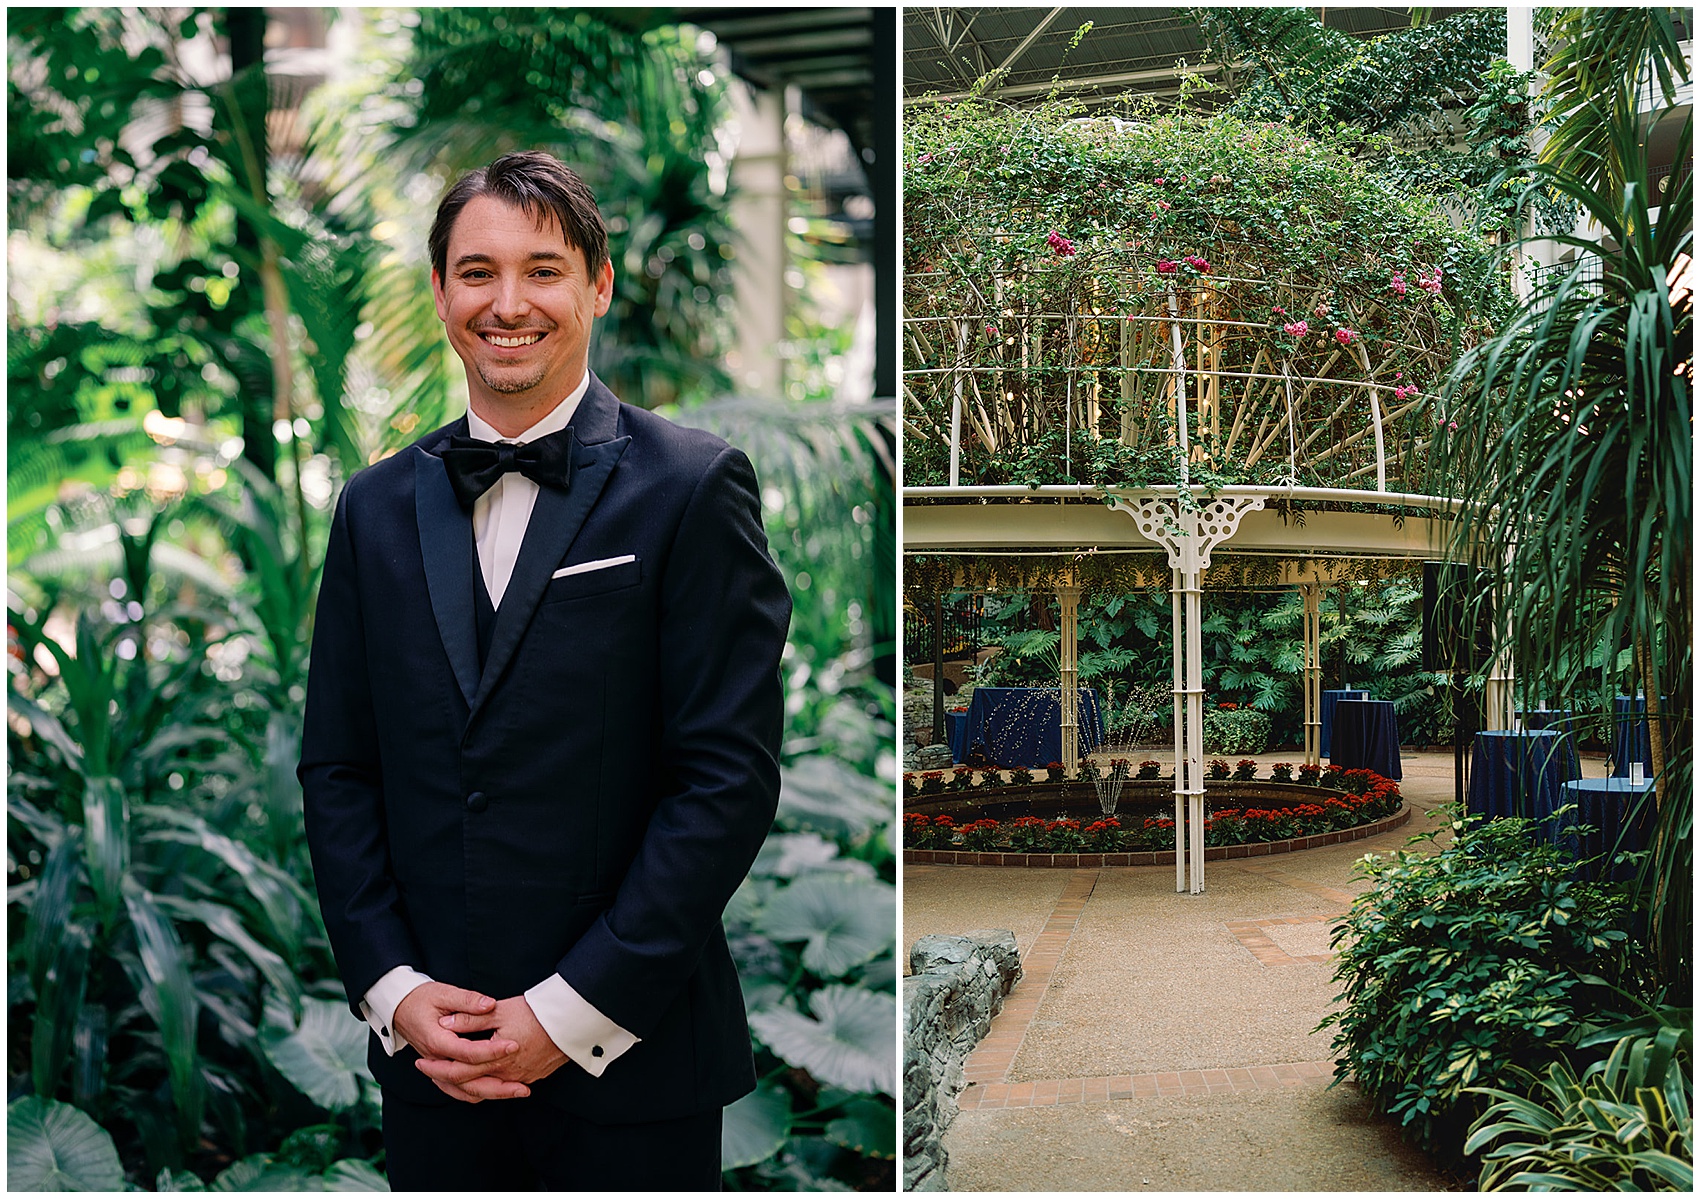 A groom stands in a tropical garden in a black tuxedo next to his wedding ceremony and cocktail hour location at his gaylord opryland wedding